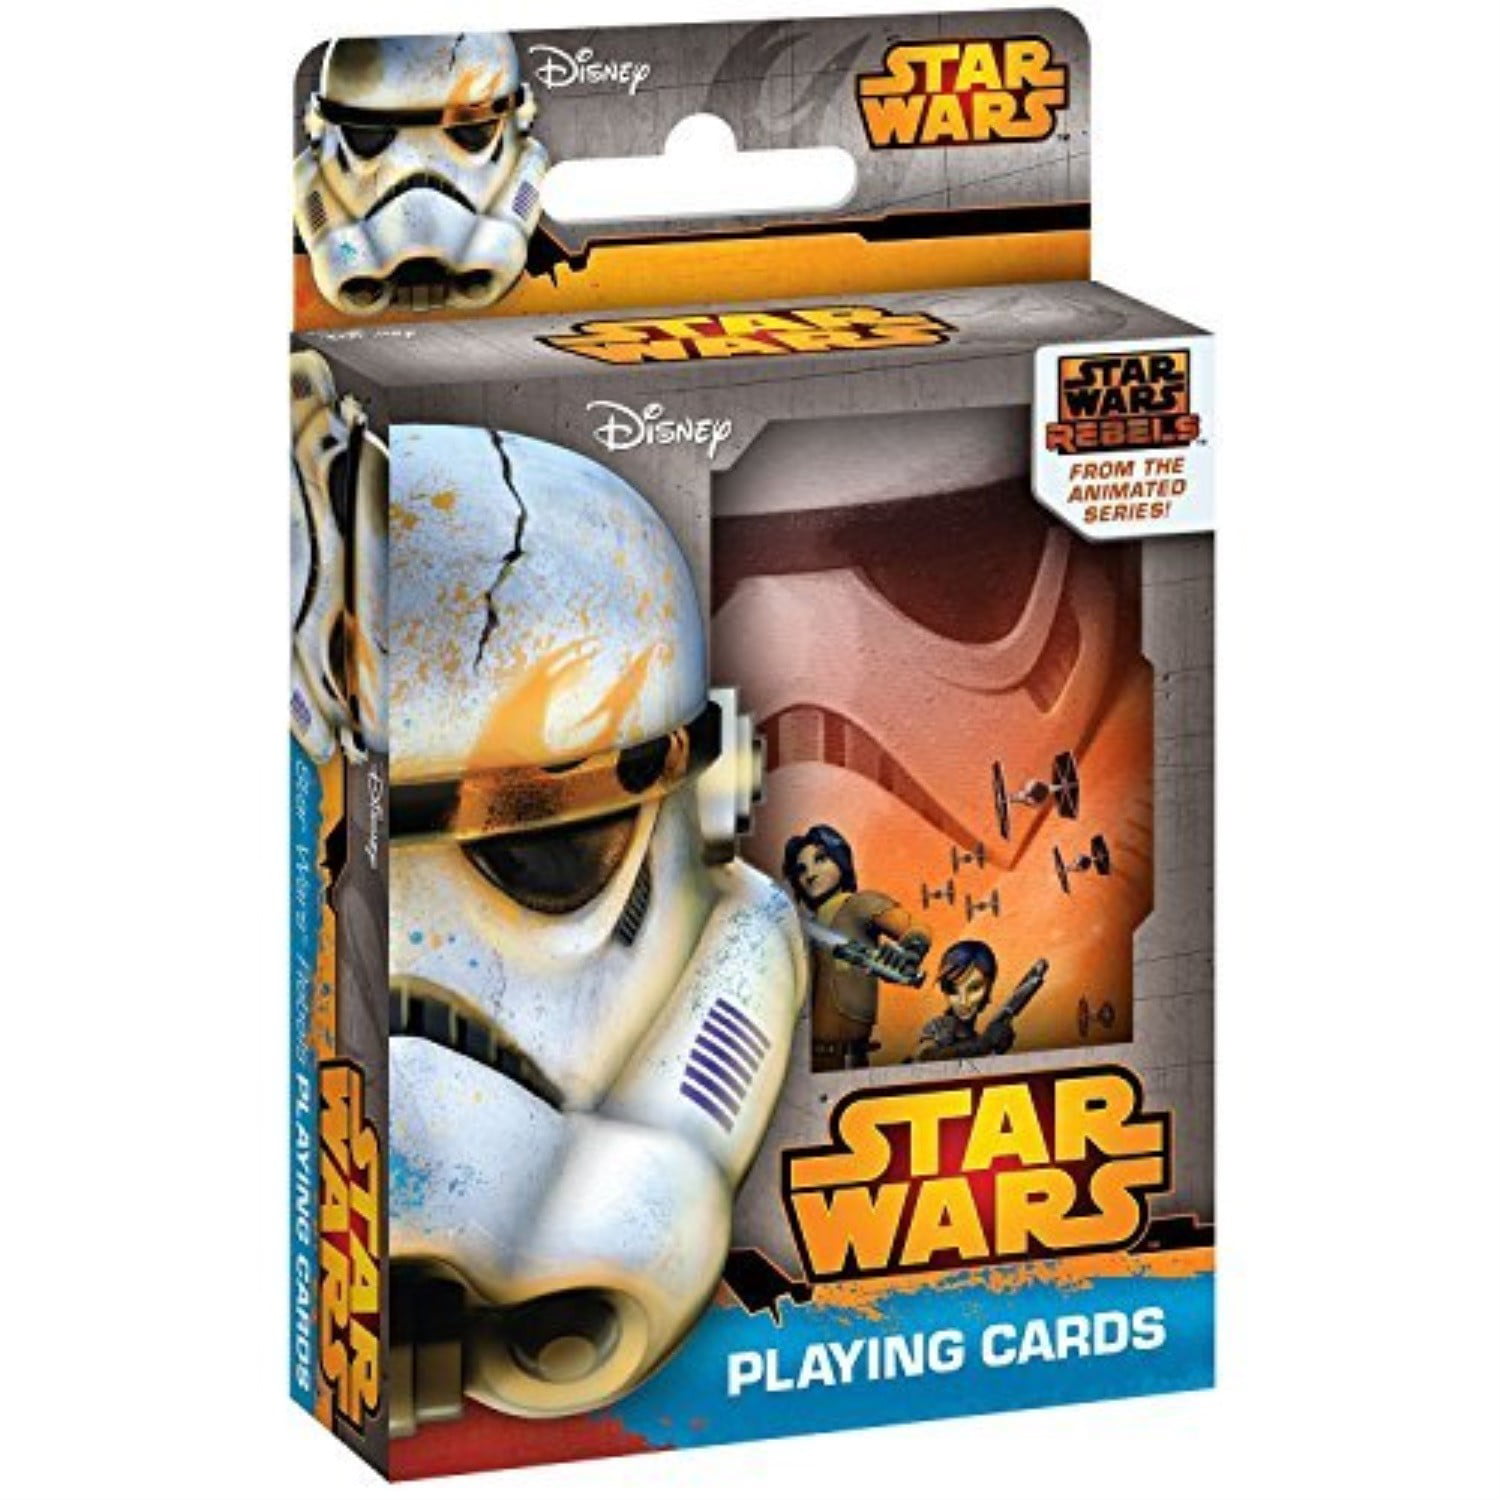 BRAND NEW Disney Star Wars Rebels Playing Cards In Collector's Metal Tin Case 